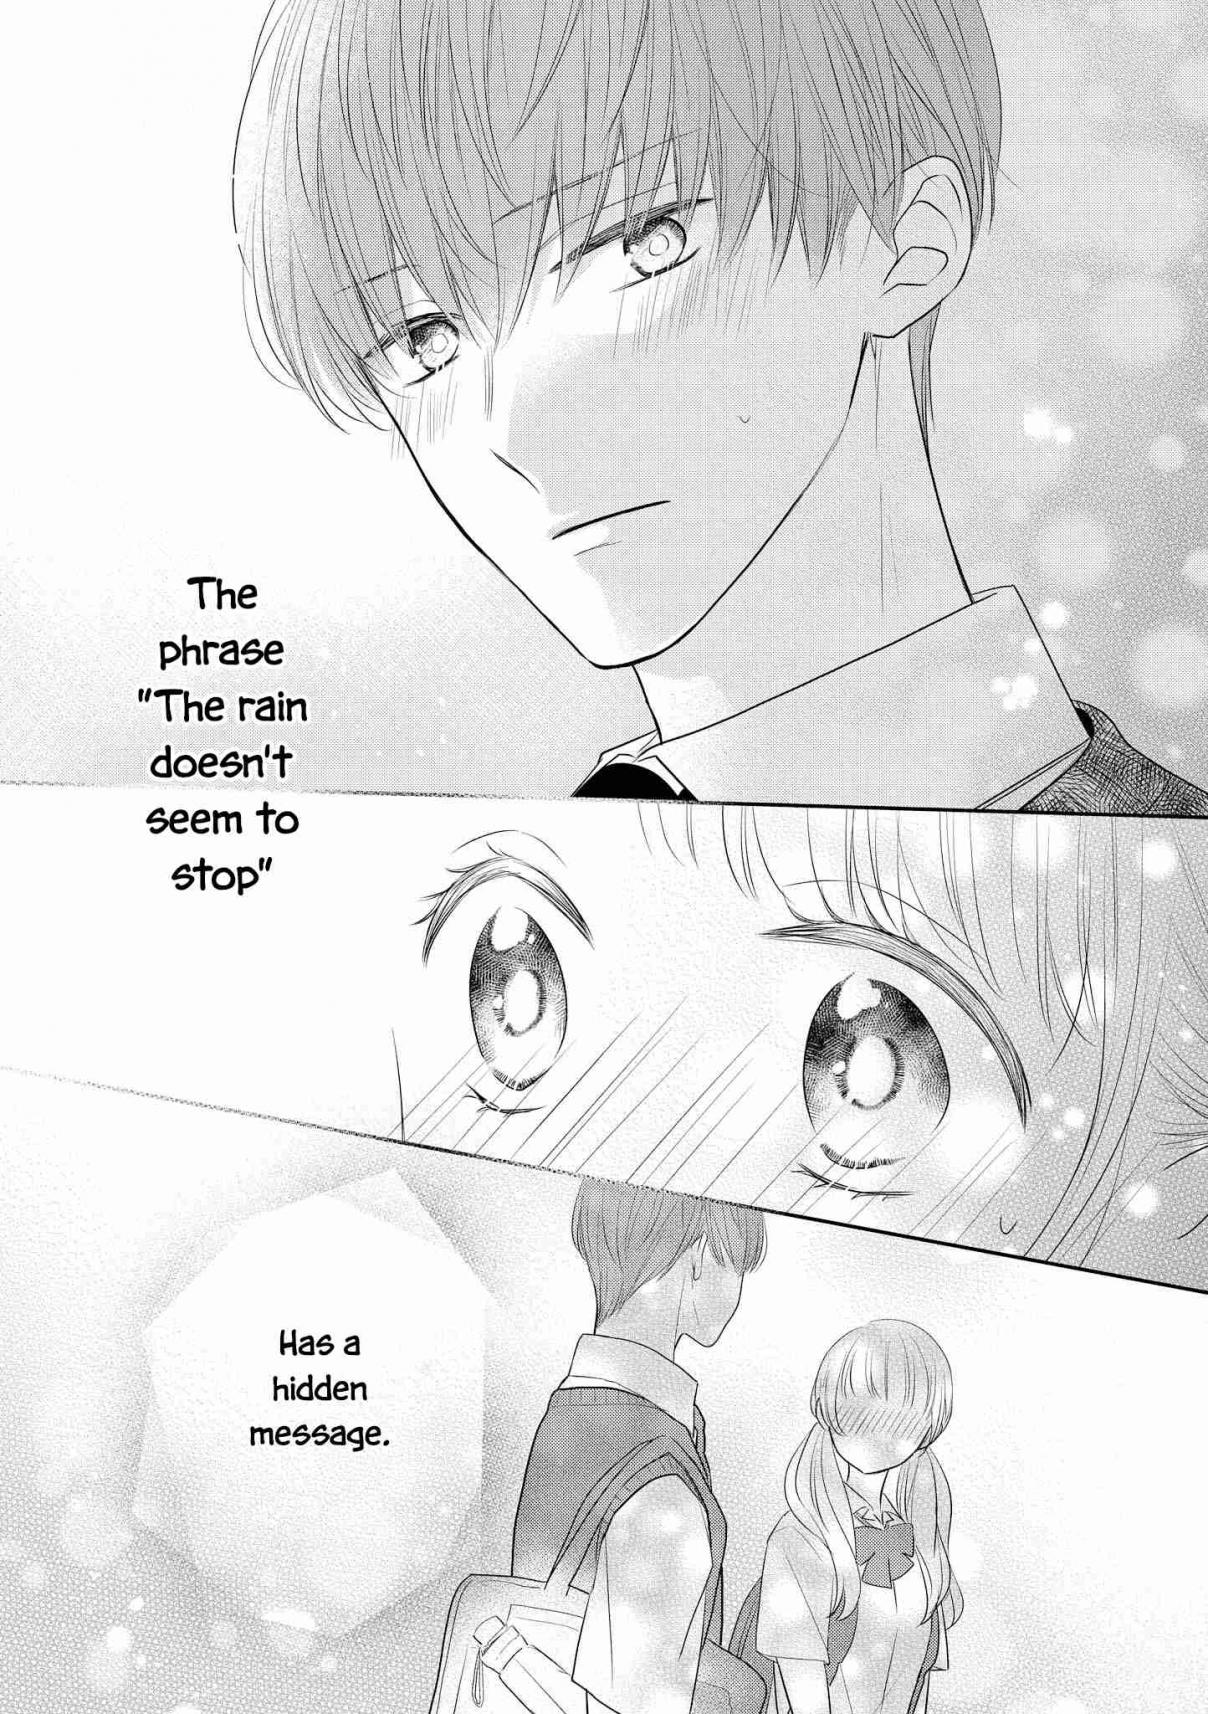 “It’s Too Precious and Hard to Read!!” 4P Short Stories Vol. 1 Ch. 21 The Rain Doesn't Seem to Stop [by Natsu Samako]